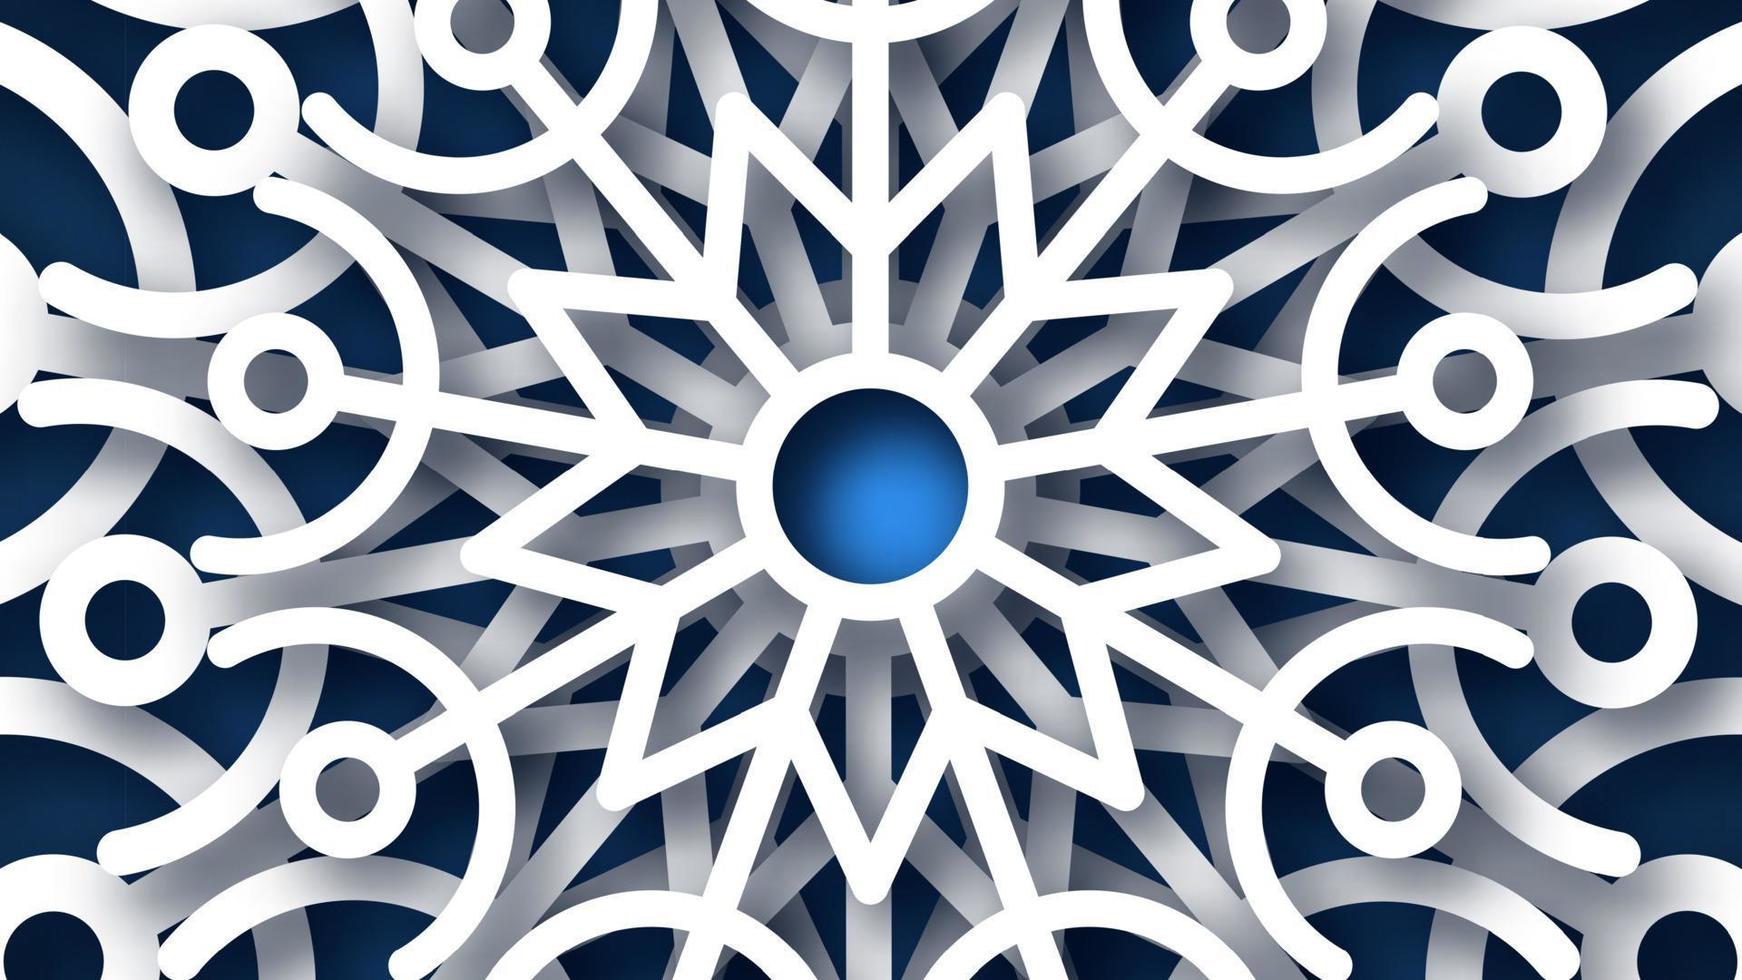 Christmas dark blue background with white paper glitter snowflakes. New year snowflakes holiday decoration. Vector illustration